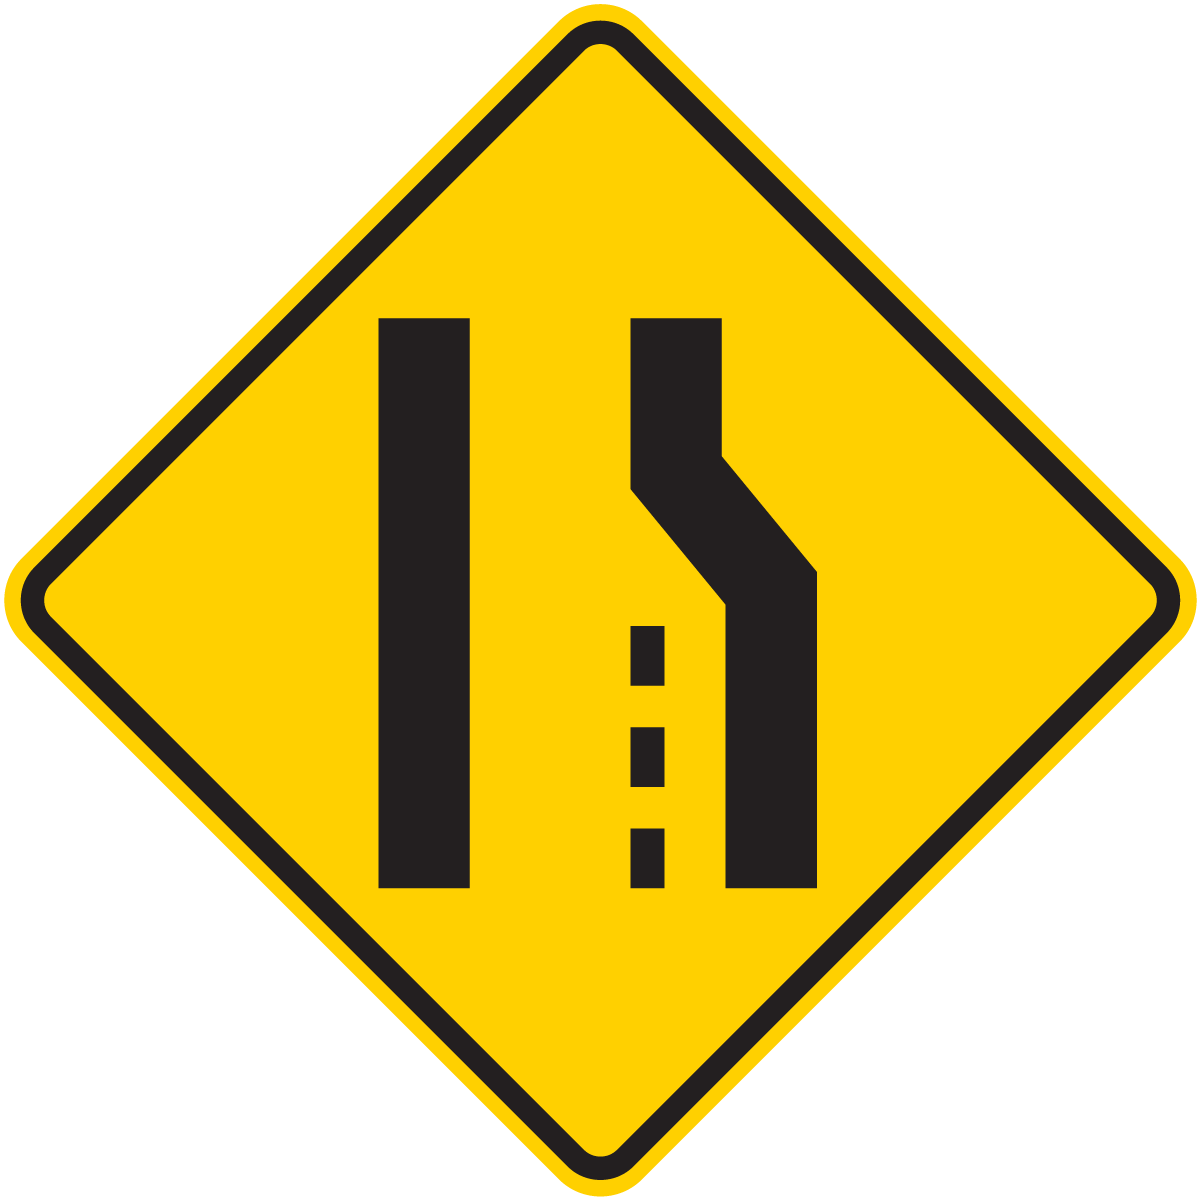 W4-2 Lane Ends (Left or Right)